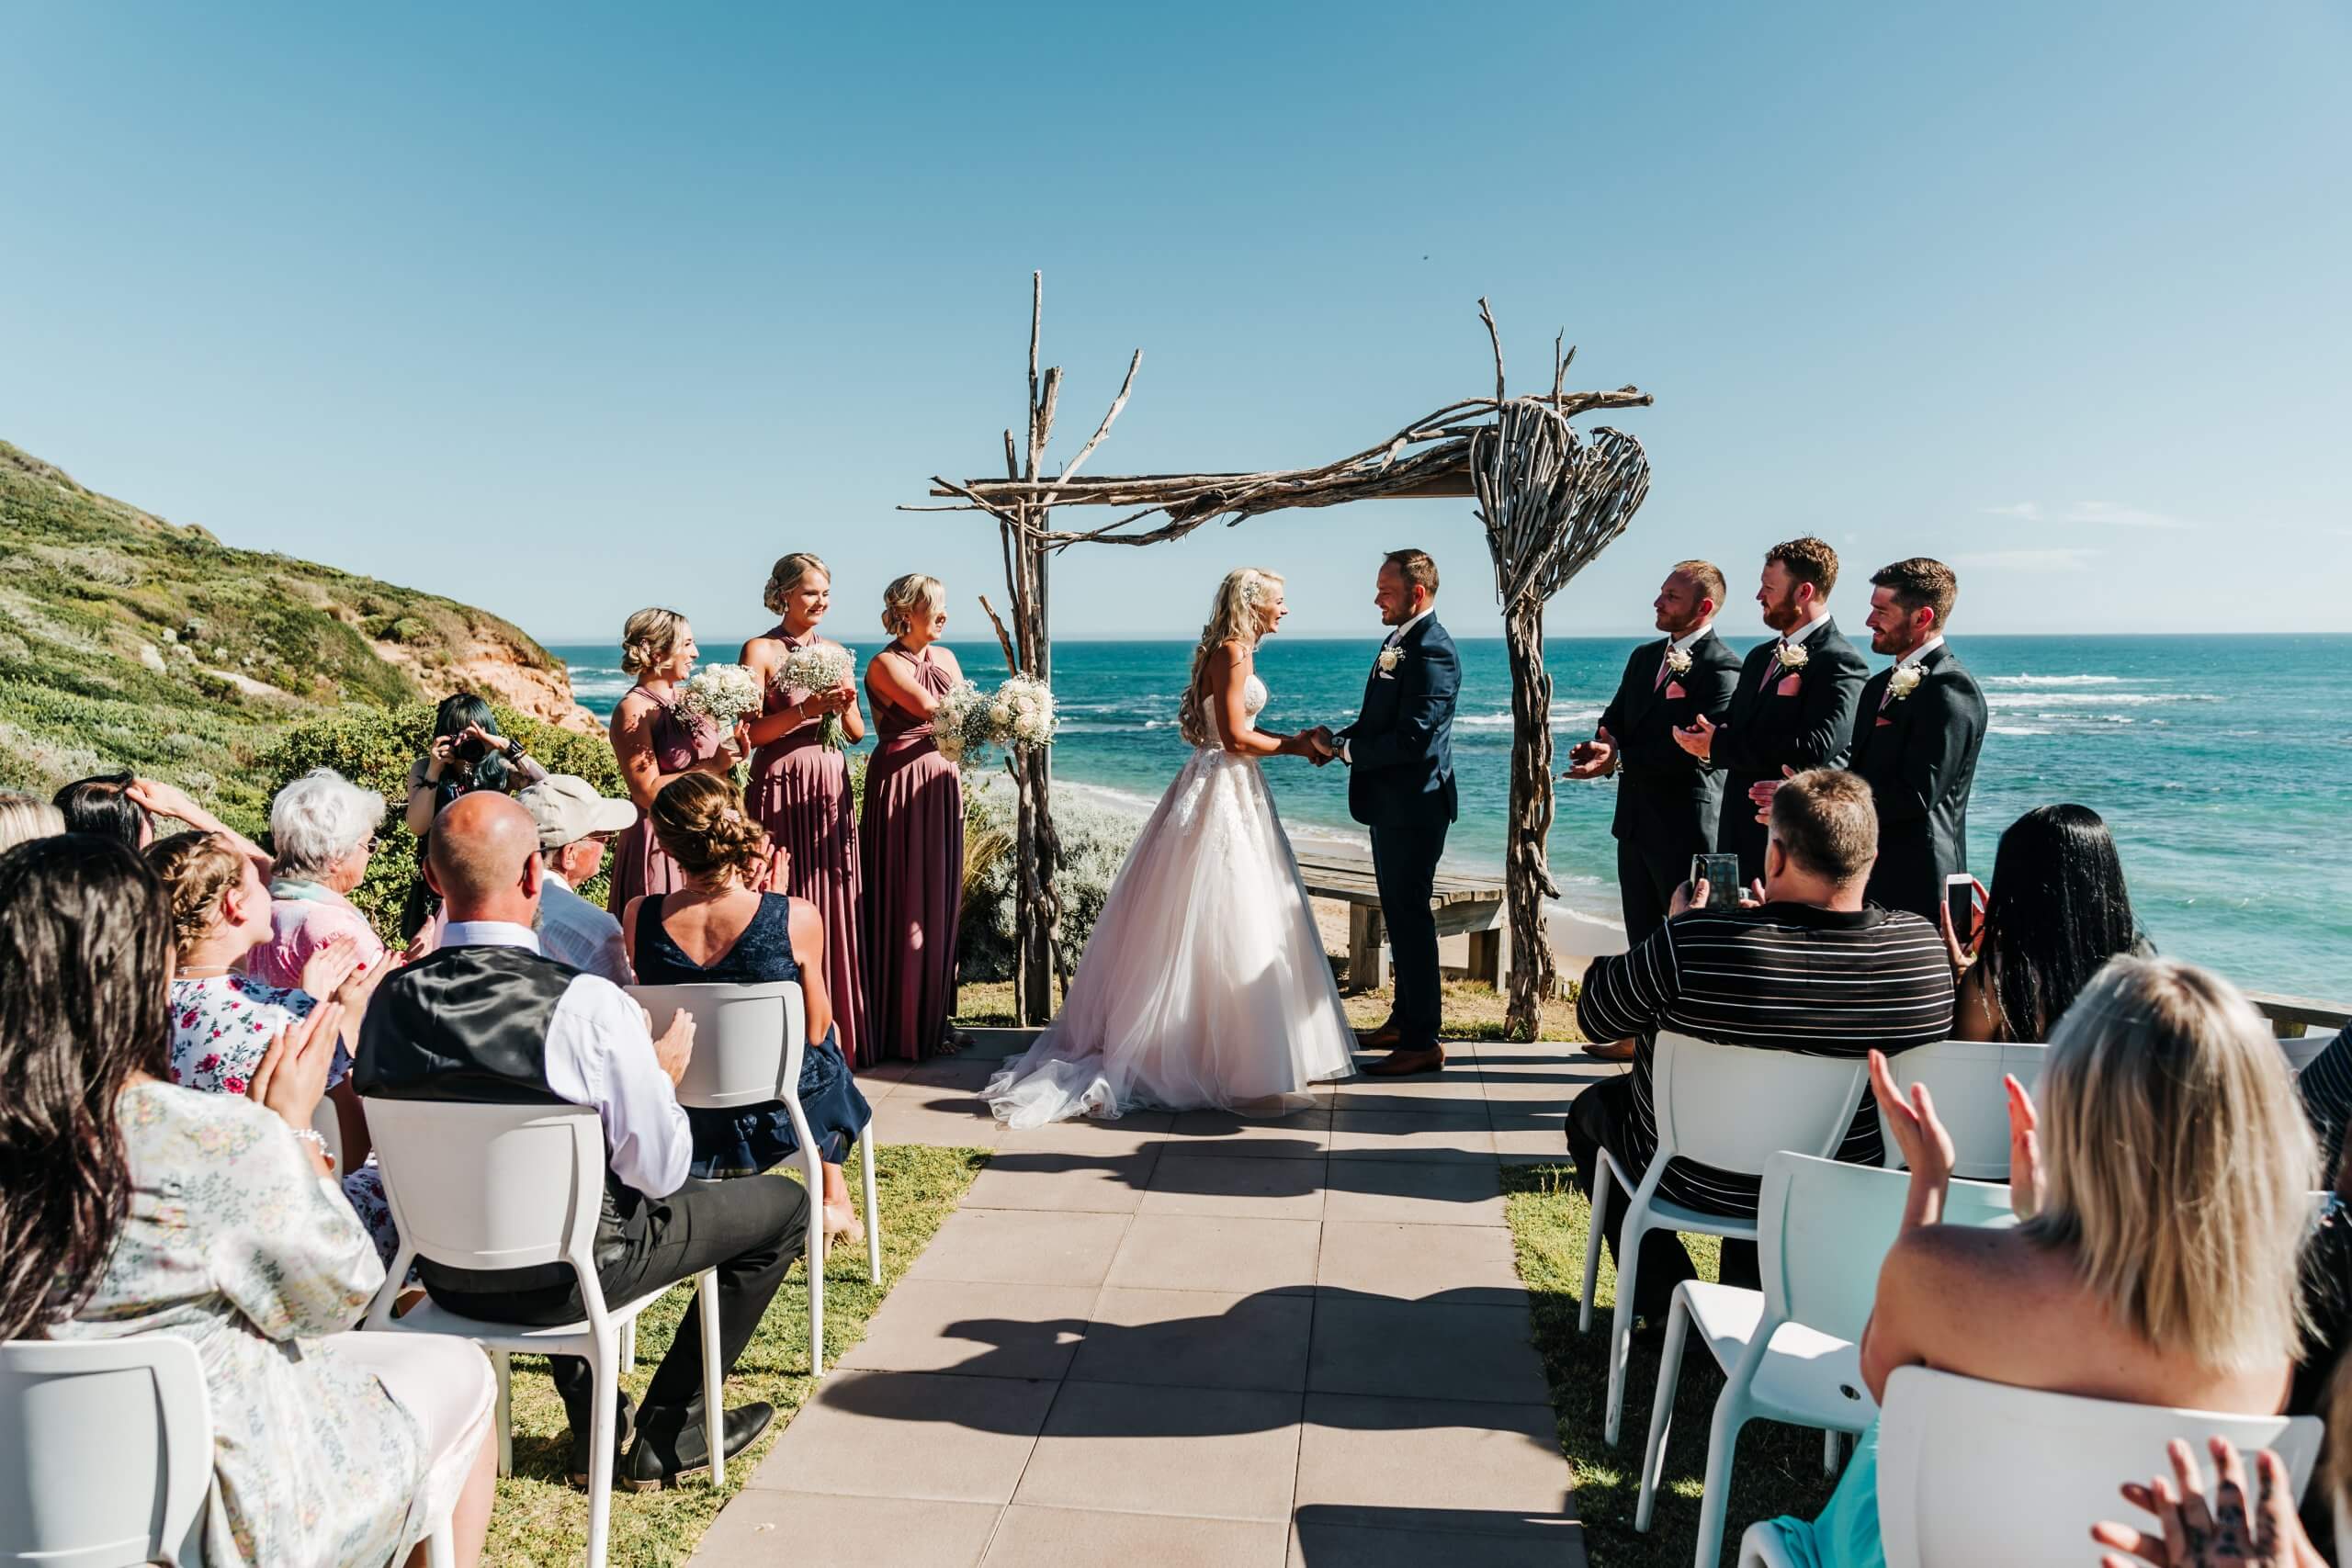 The right wedding suppliers, this venue was arranged perfectly that would match the view of the mountain and the sea, captured by Black Avenue Productions